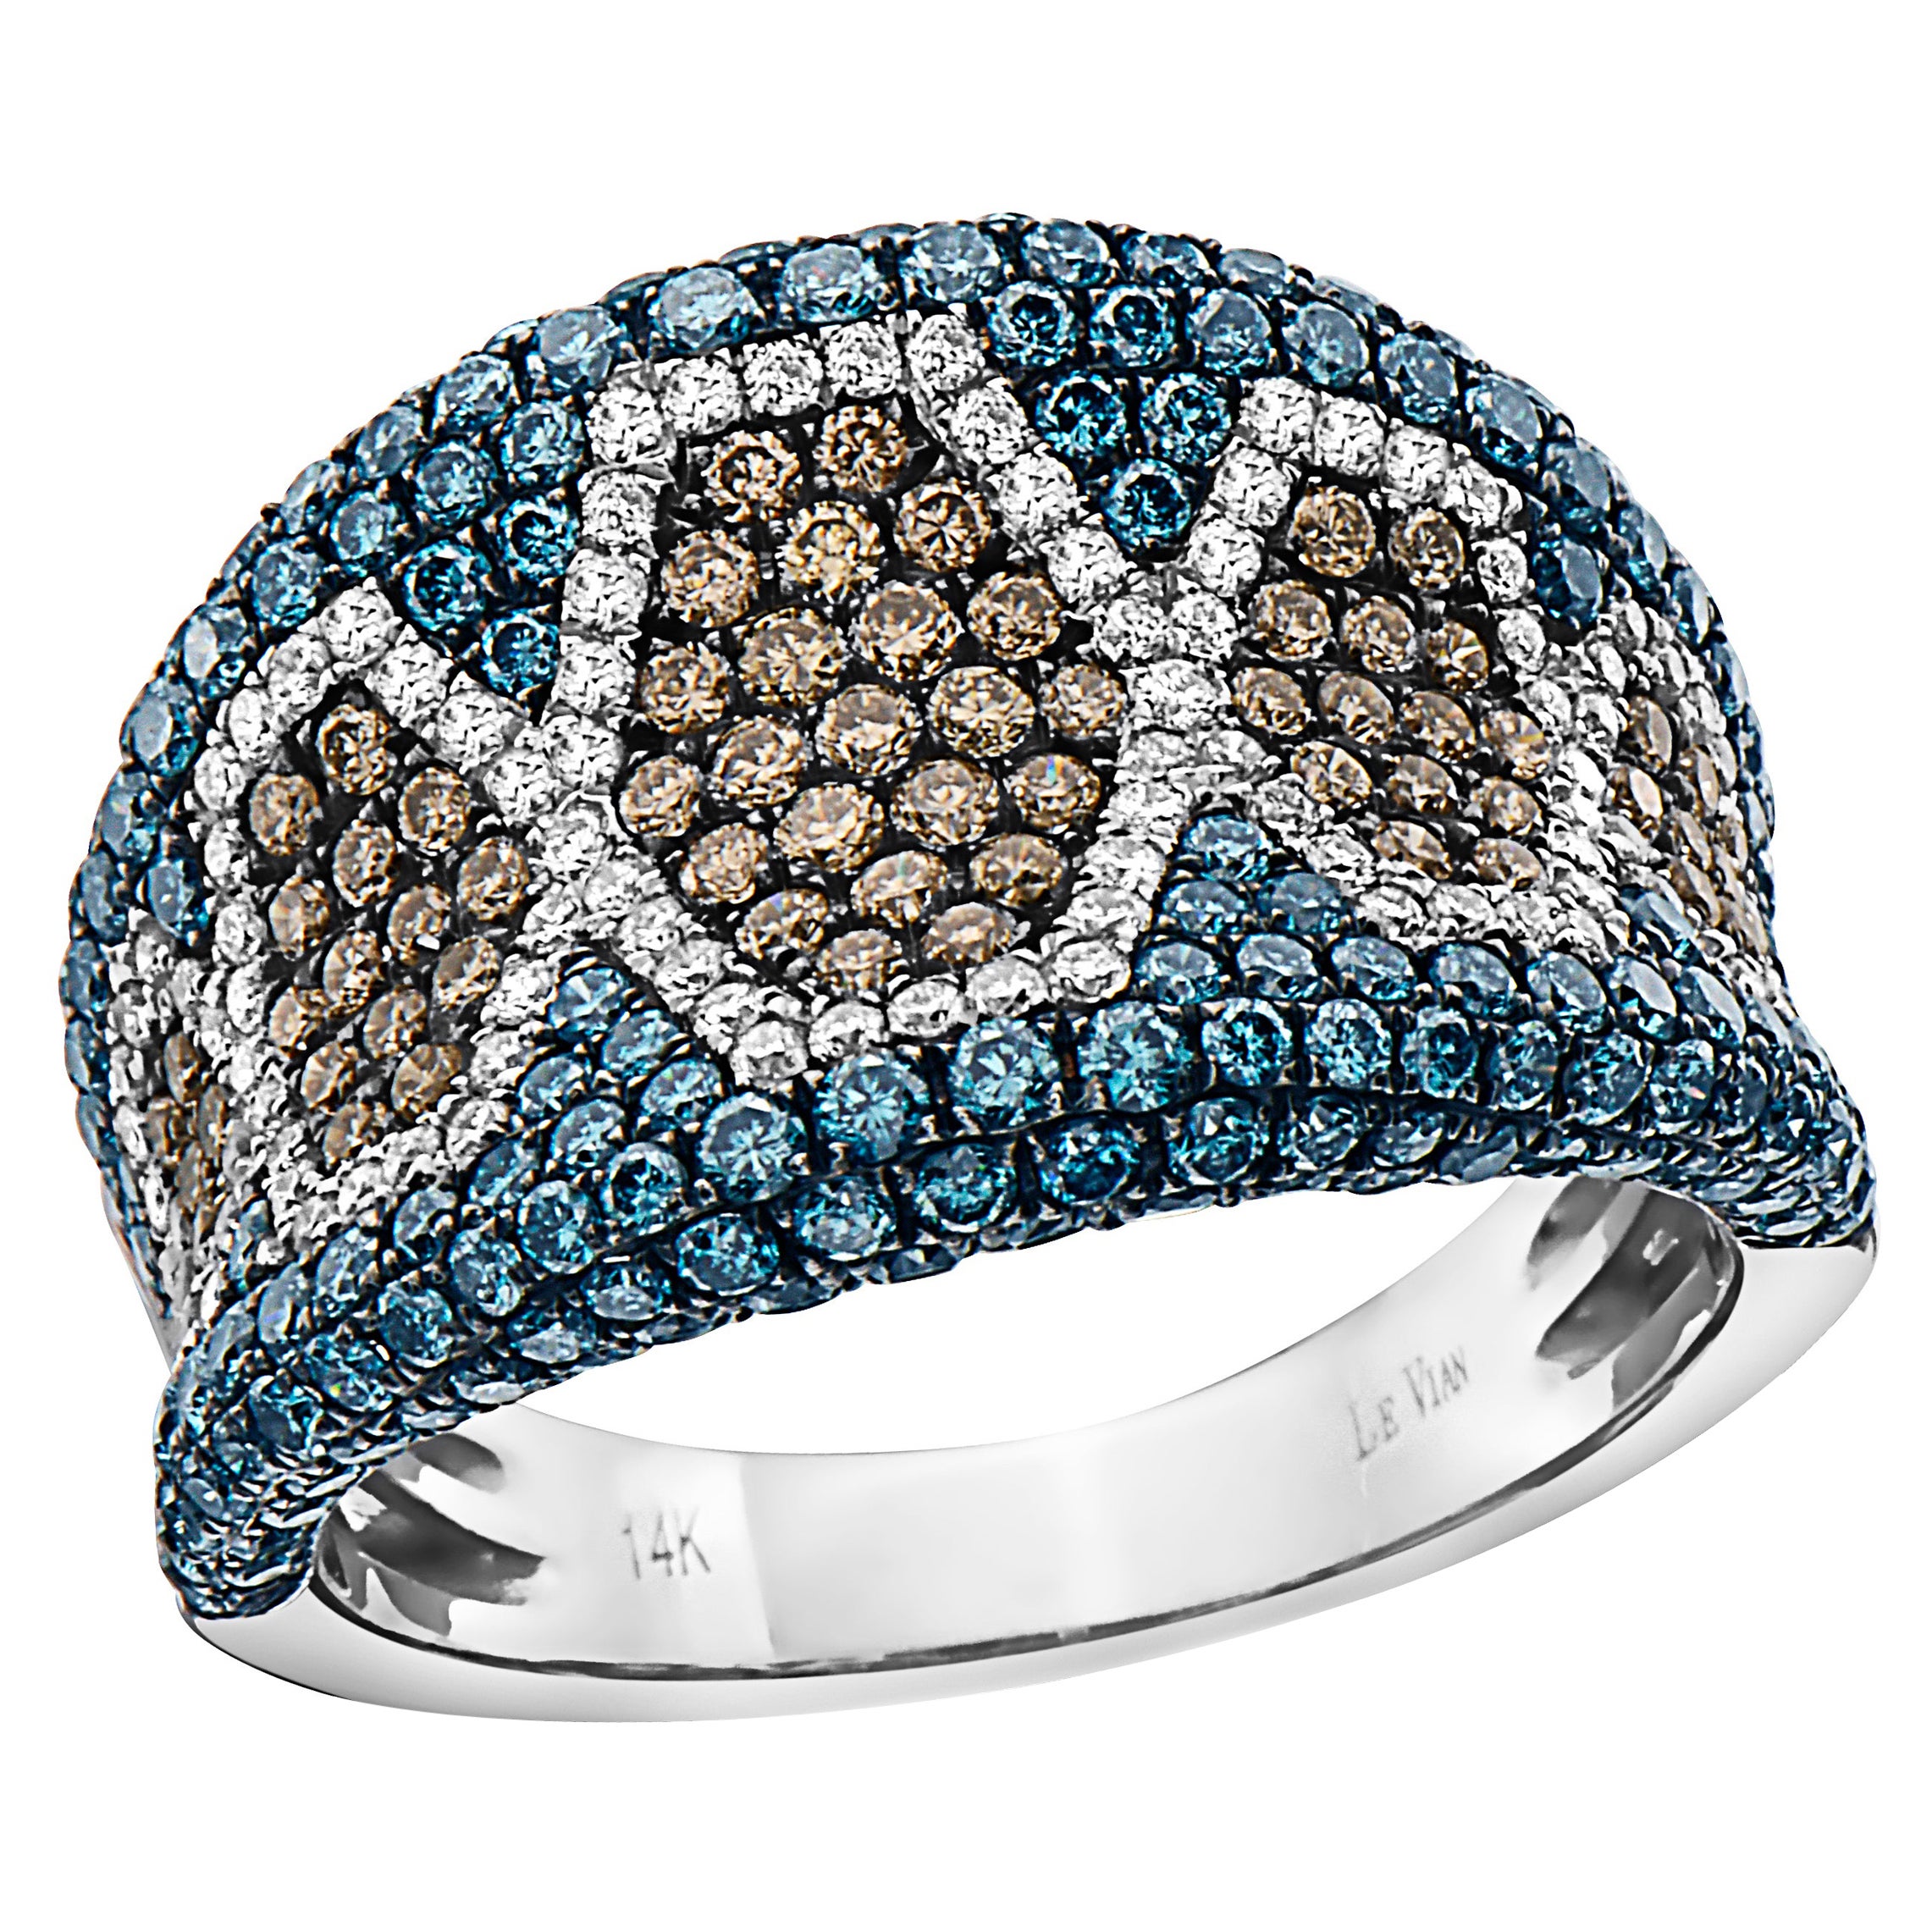 LeVian 14K White Gold Round Blue Chocolate Brown Diamond Cocktail Band Ring